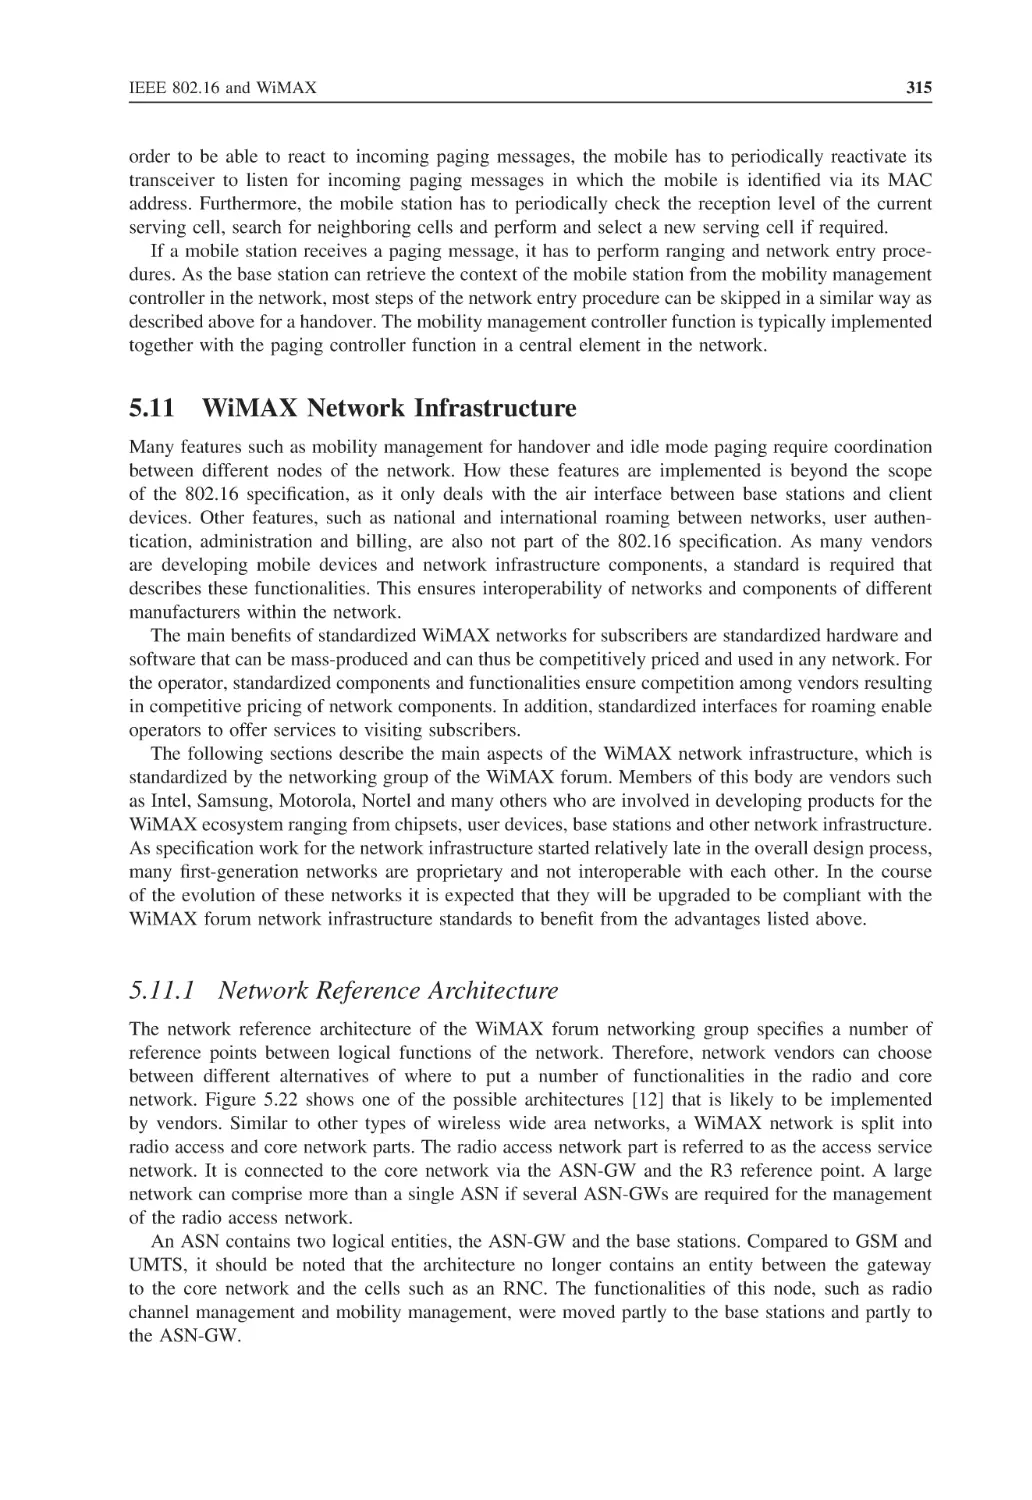 5.11 WiMAX Network Infrastructure
5.11.1 Network Reference Architecture